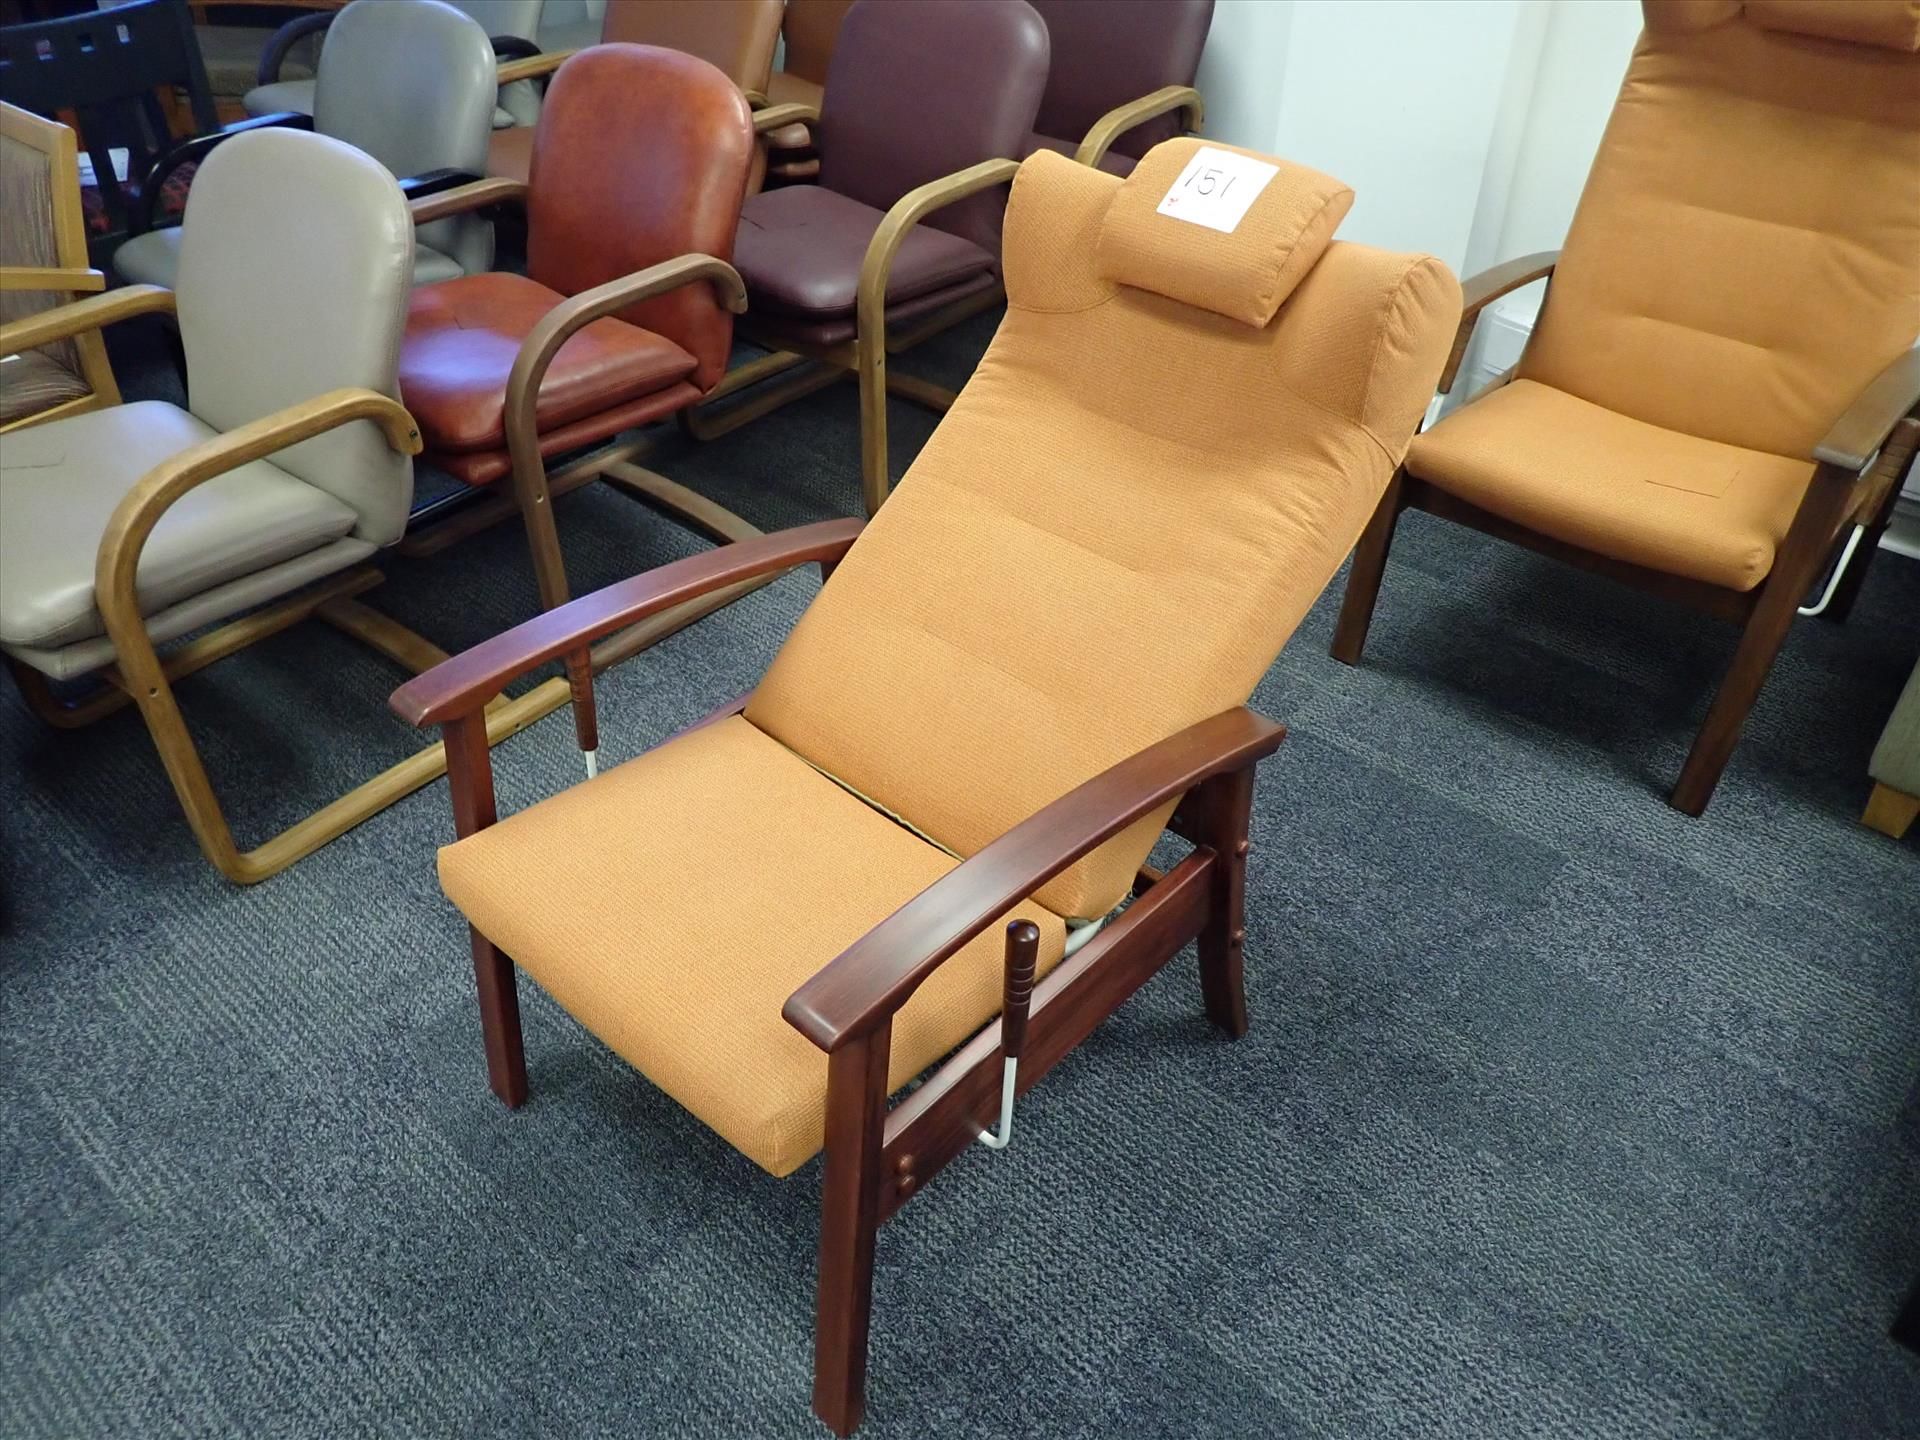 Clipper back-recliner, gas-cylinder, head-rest, assistance-bar, dual-hand levers, stain-resistant - Image 2 of 3